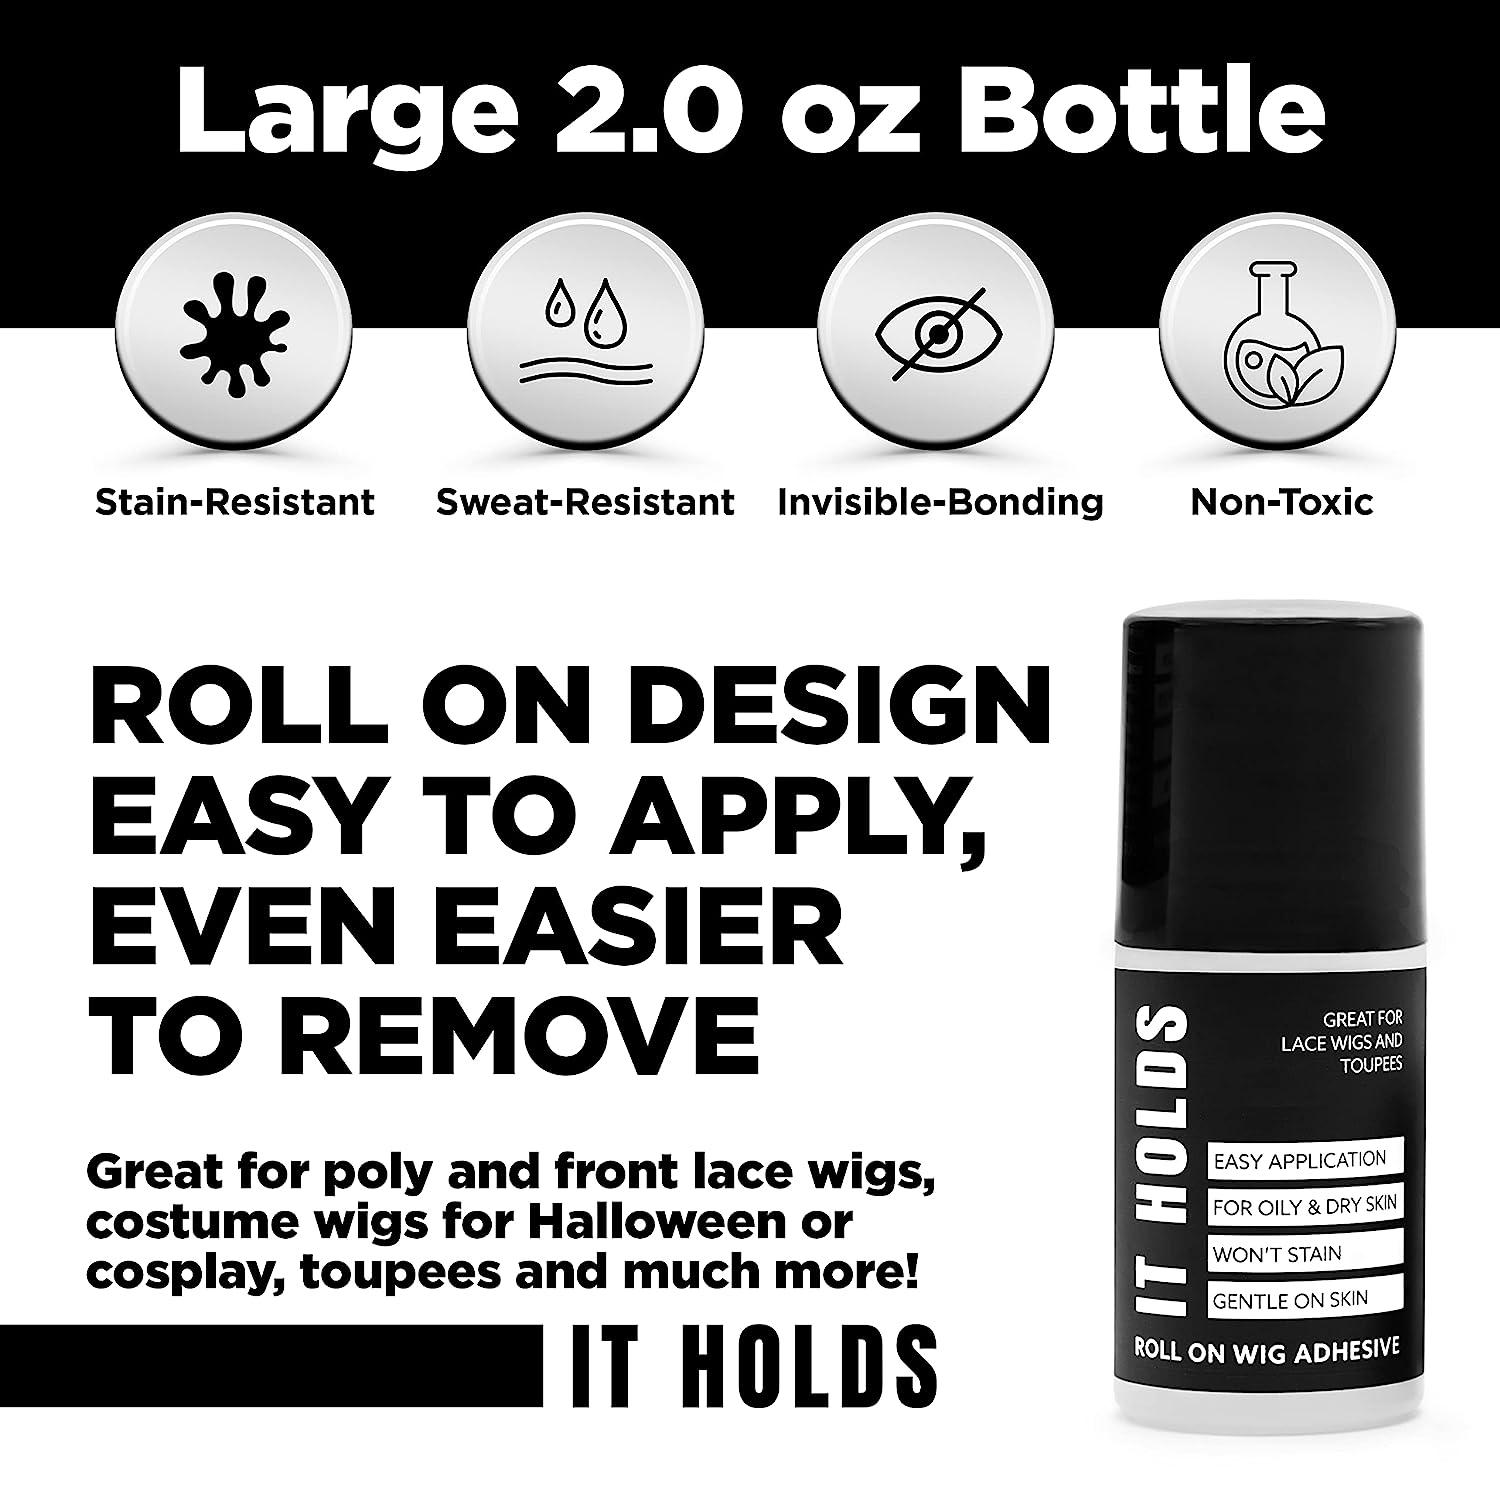 Compression Premium Roll On Body Adhesive for Skin, Body Glue for